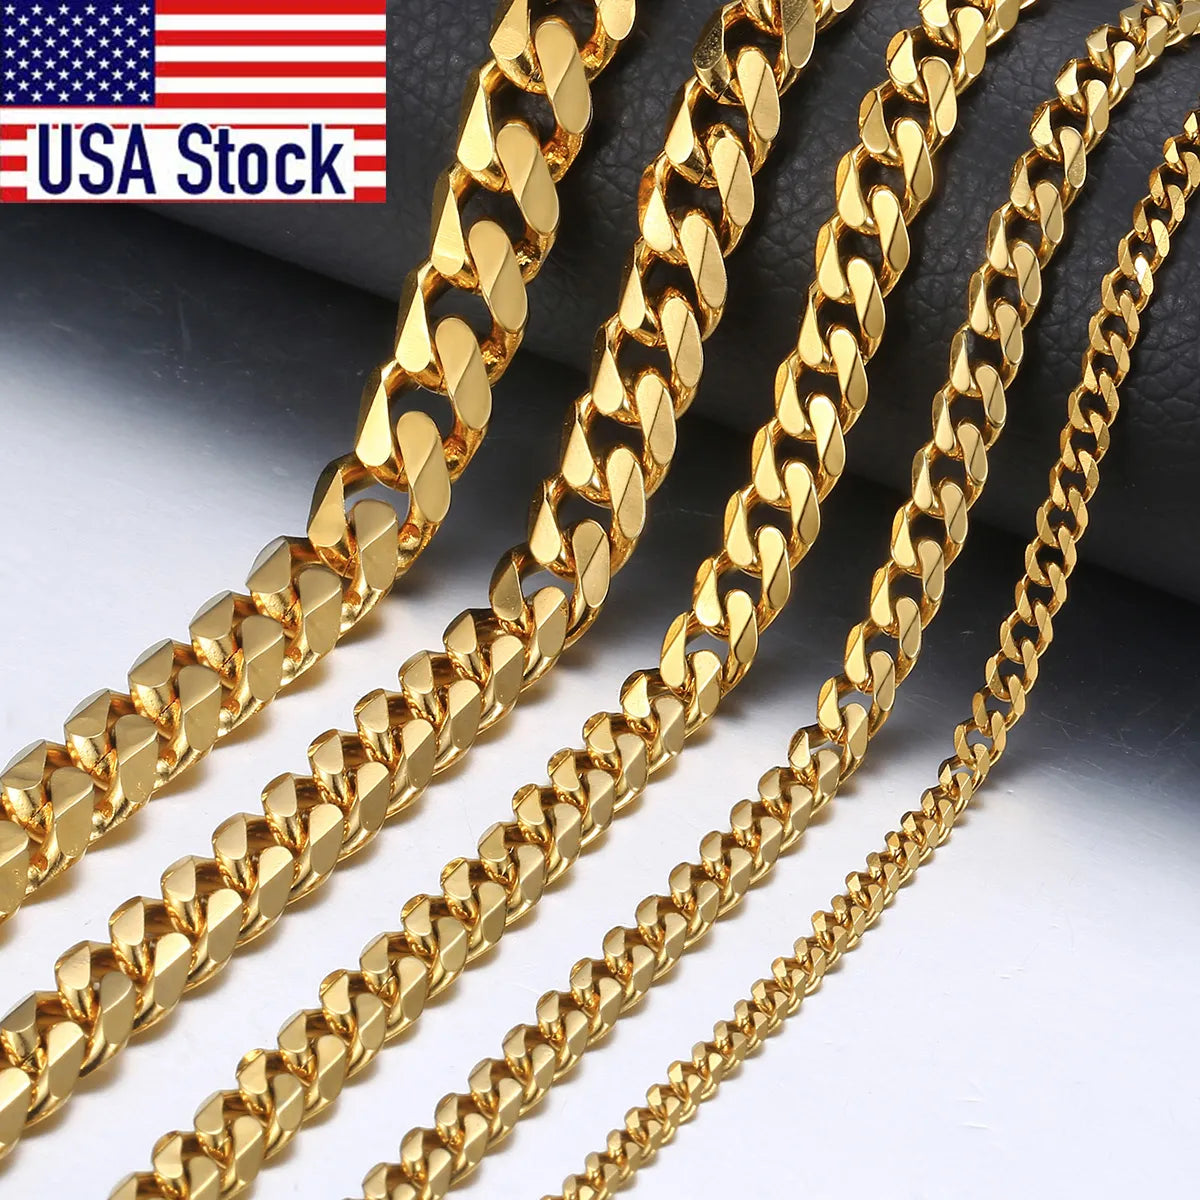 Hiphop Stainless Steel Necklace Curb Cuban Link Chain For Men Women Gold Color Solid Metal Punk Jewelry Gift KNM08